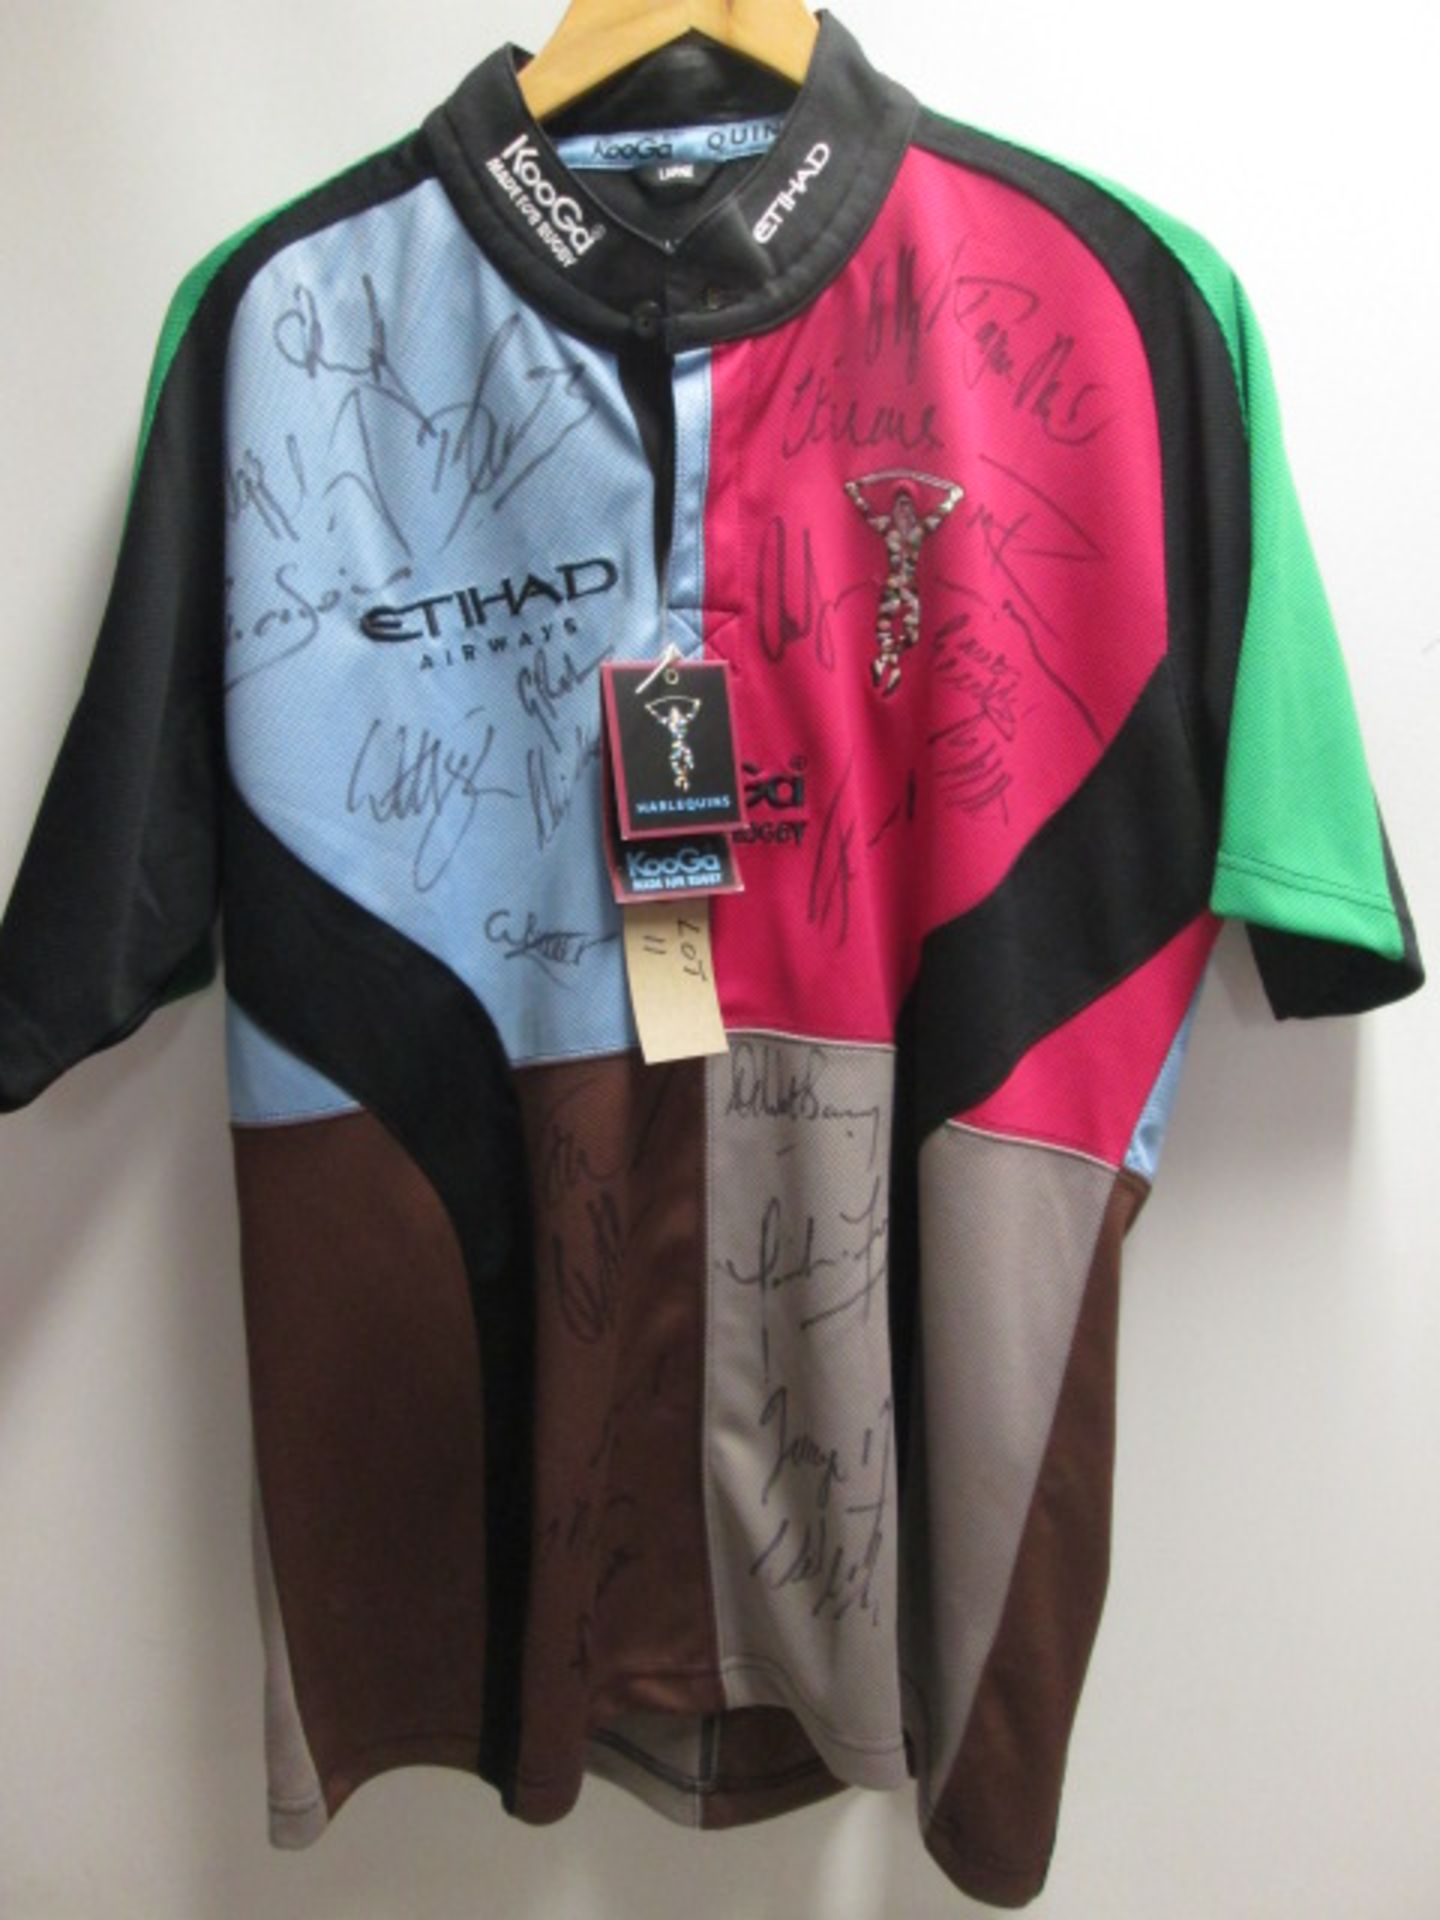 Harlequin's Kooga Rugby Shirt, Signed by the Team. Sponsors Include 'Etihad Airways, eteach.com &